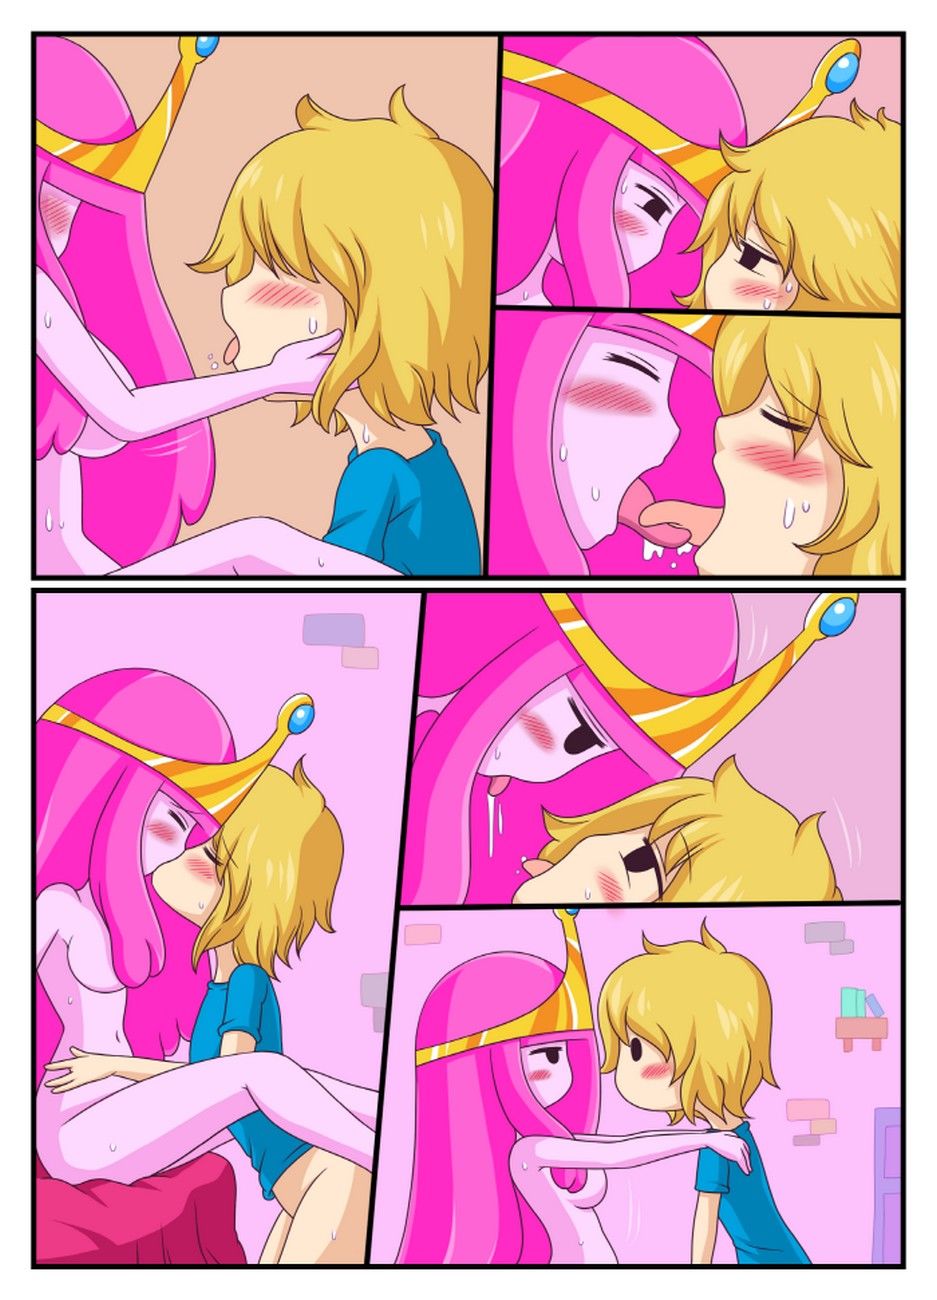 Adventure_Time_-_Adult_Time_1 comix_43477.jpg